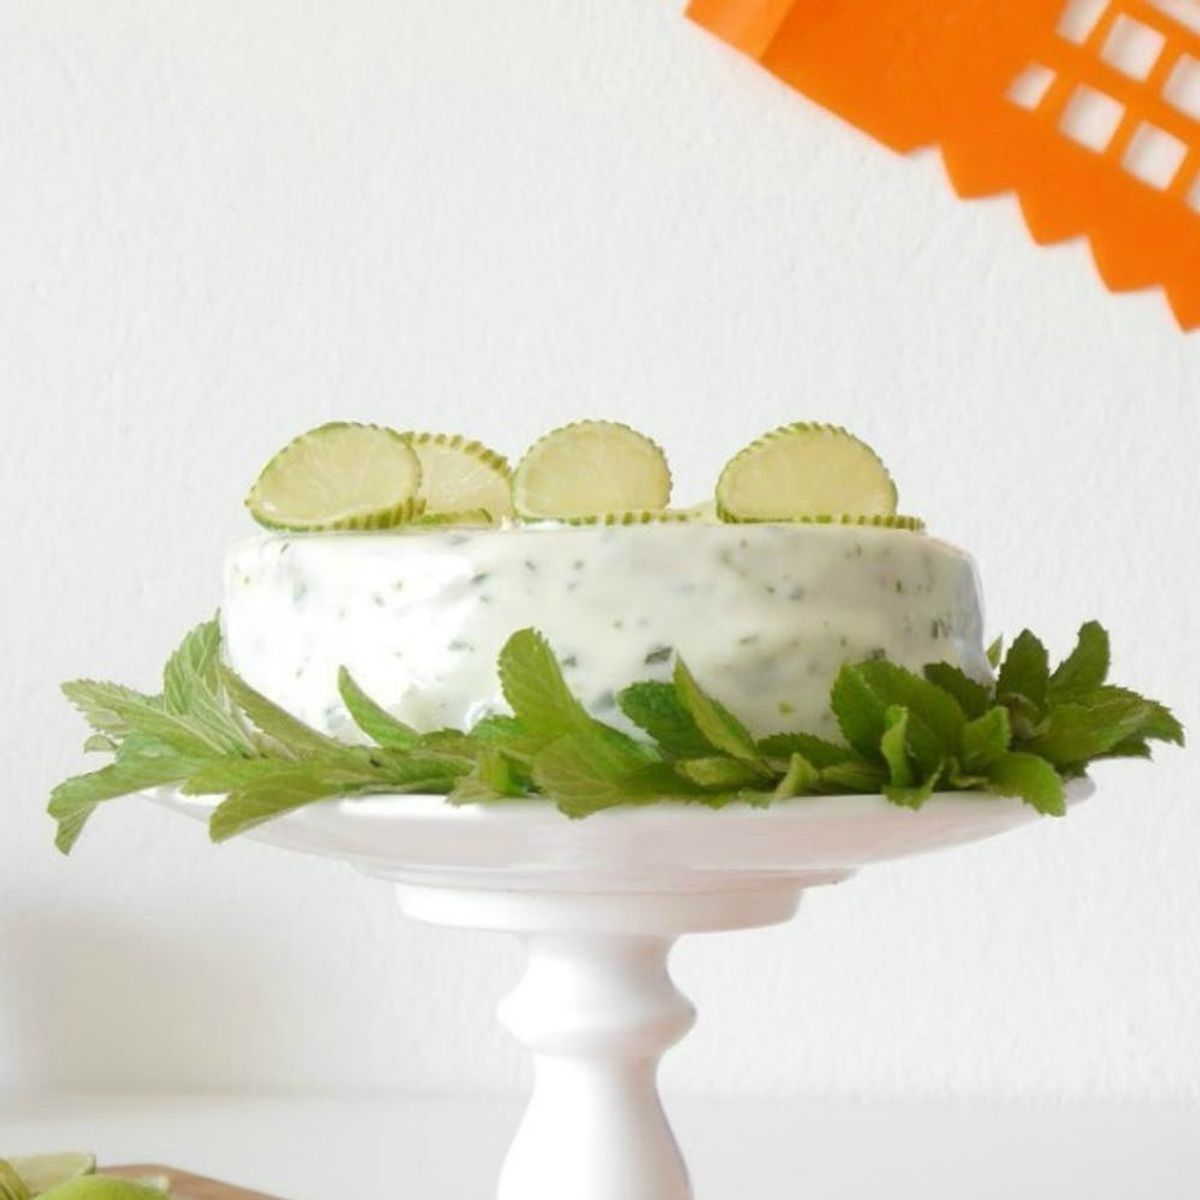 Mojito Popsicles, Cheesecake, More Foods Inspired by the Cuban Cocktail